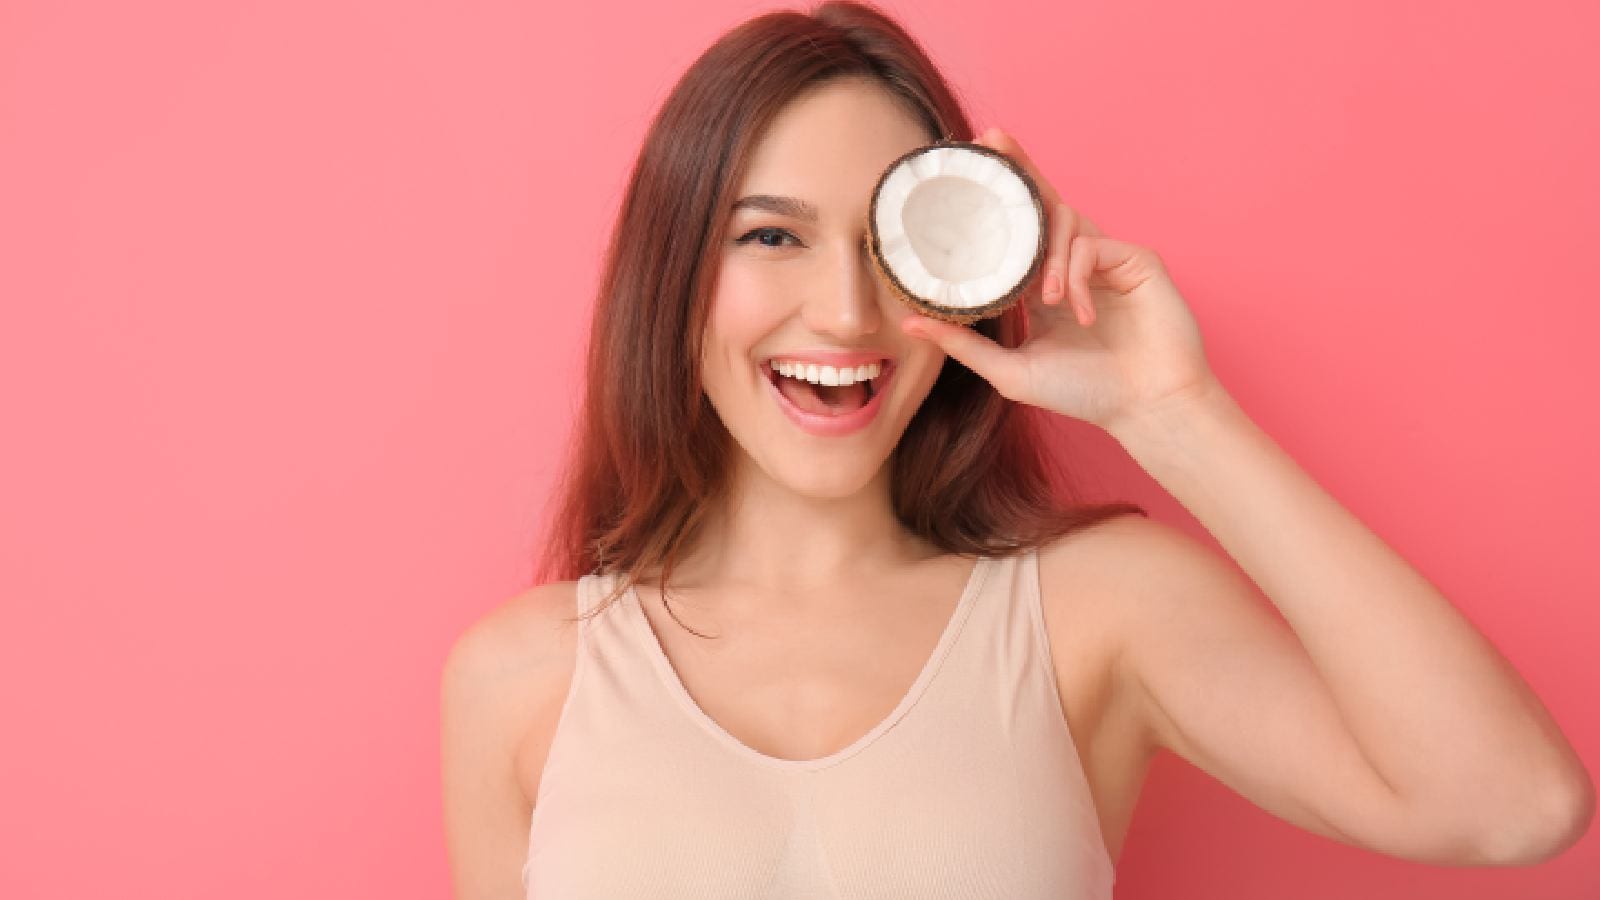 Coconut oil vs coconut milk: Which one is better for hair?